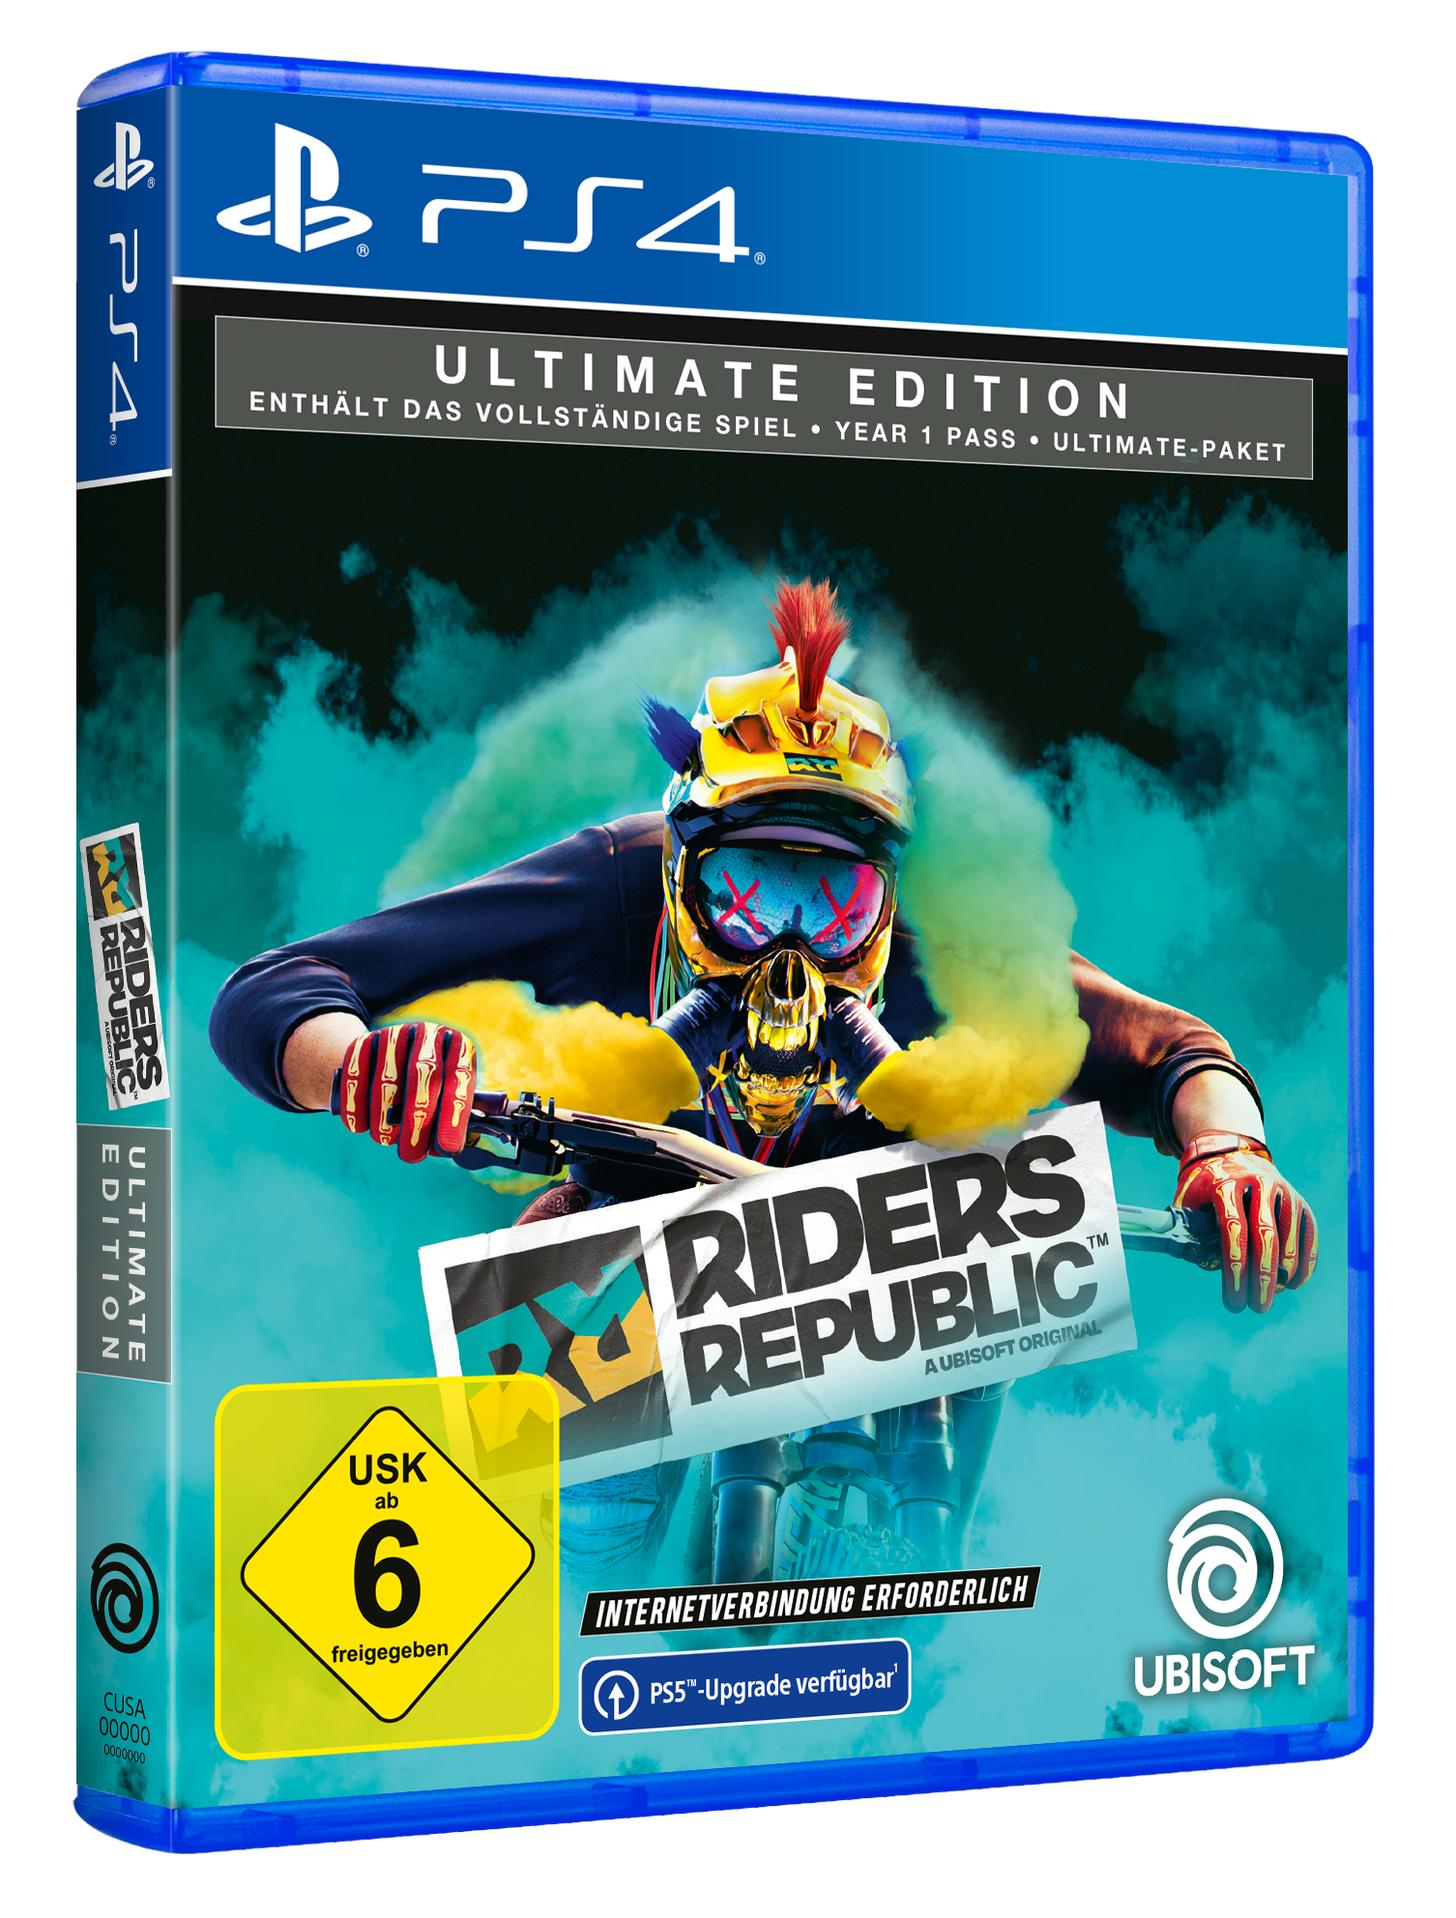 Riders Republic - Ultimate Edition - 4] [PlayStation